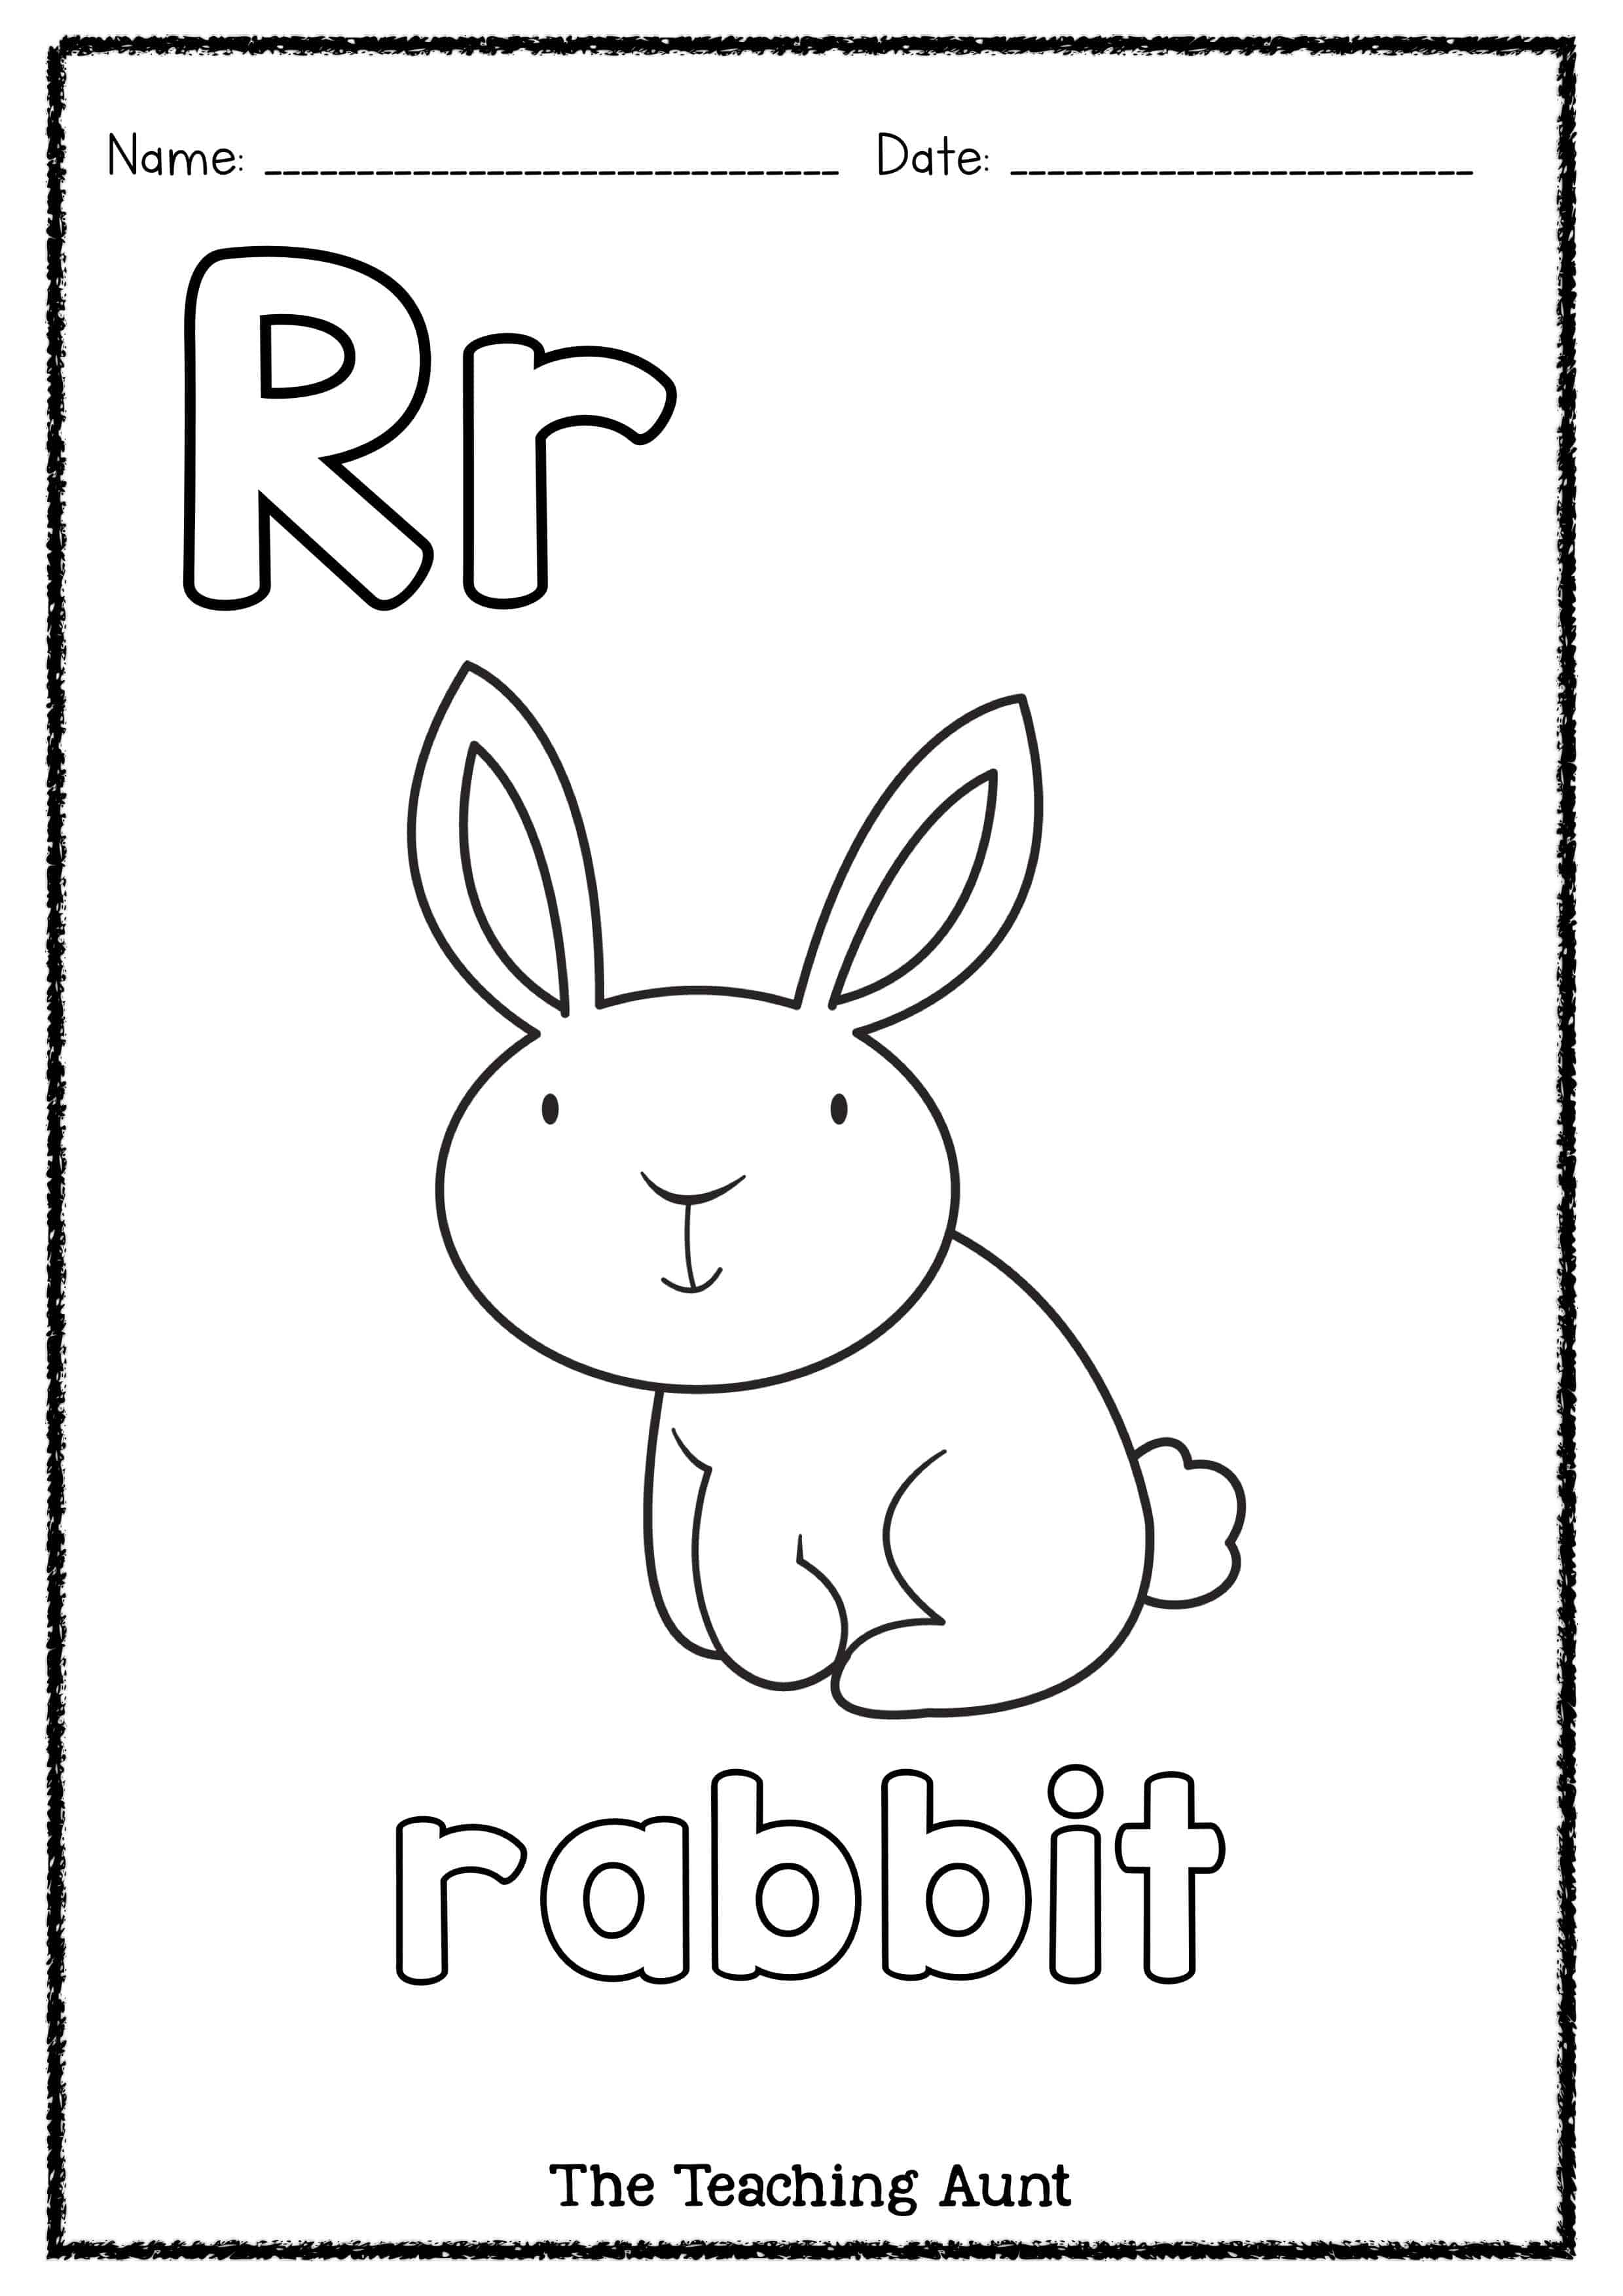 R is for Rabbit Art and Craft